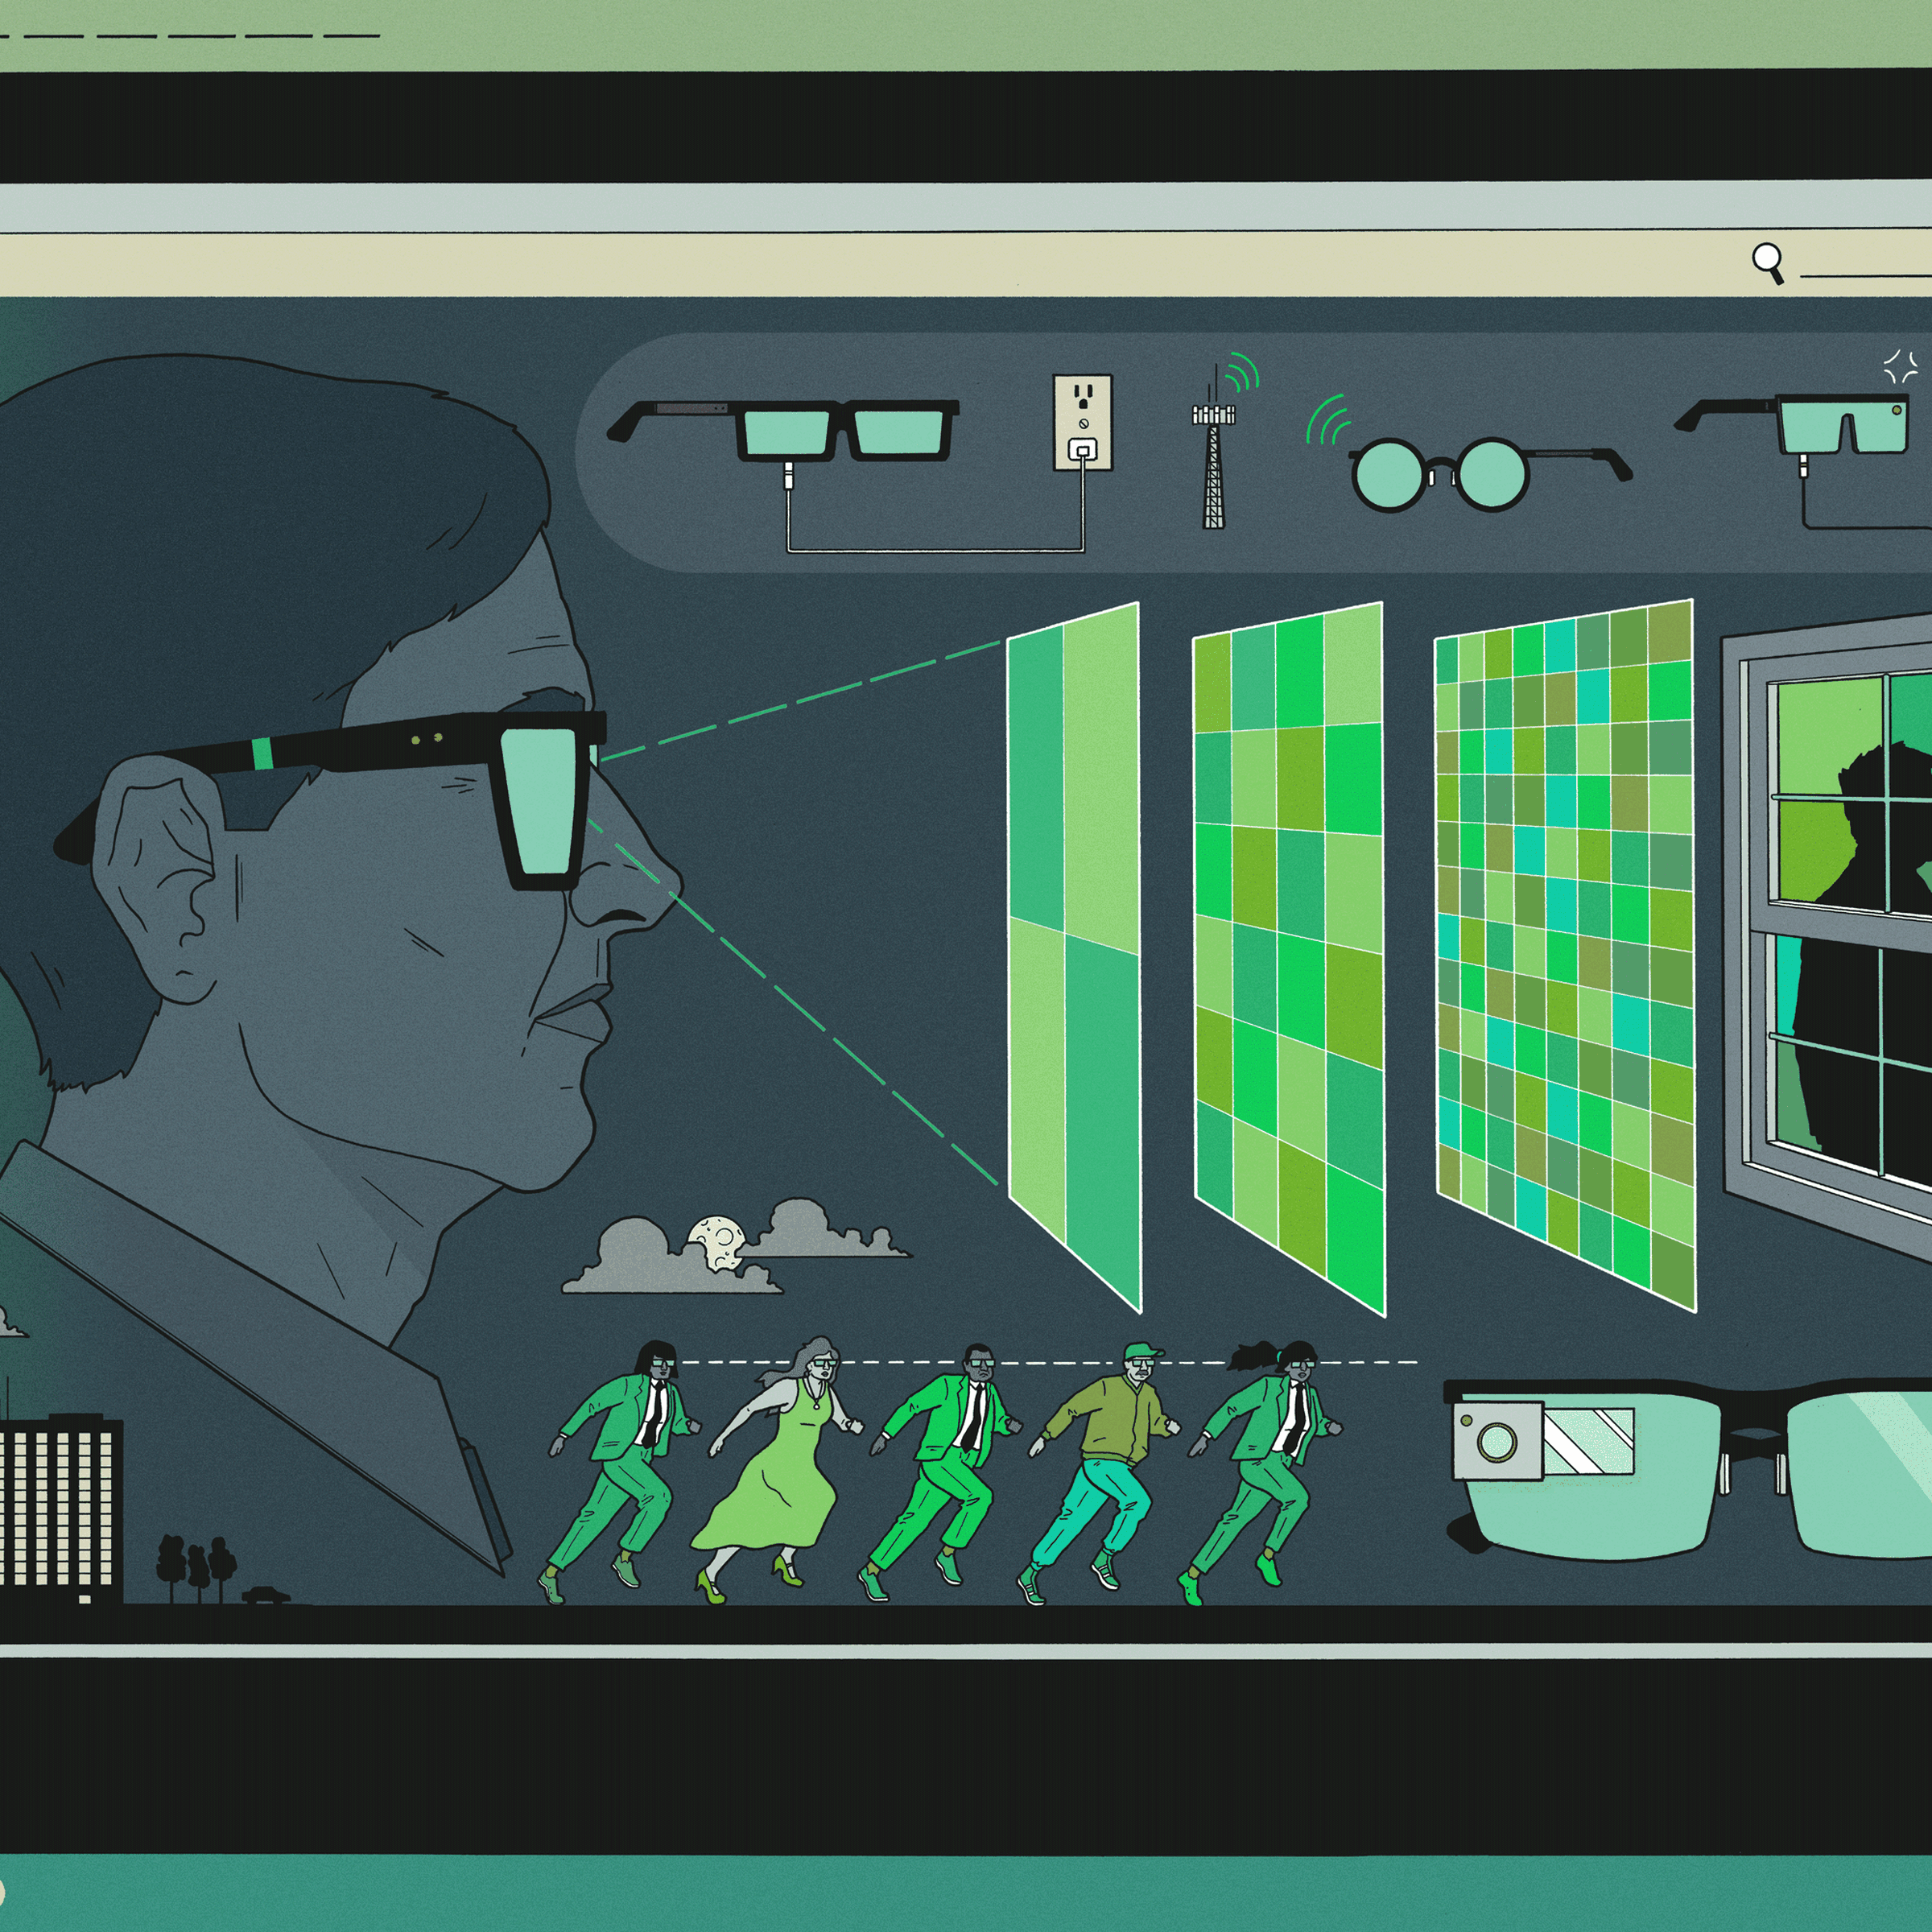 Graphic of spy wearing smart glasses that depicts various spy-like activities.